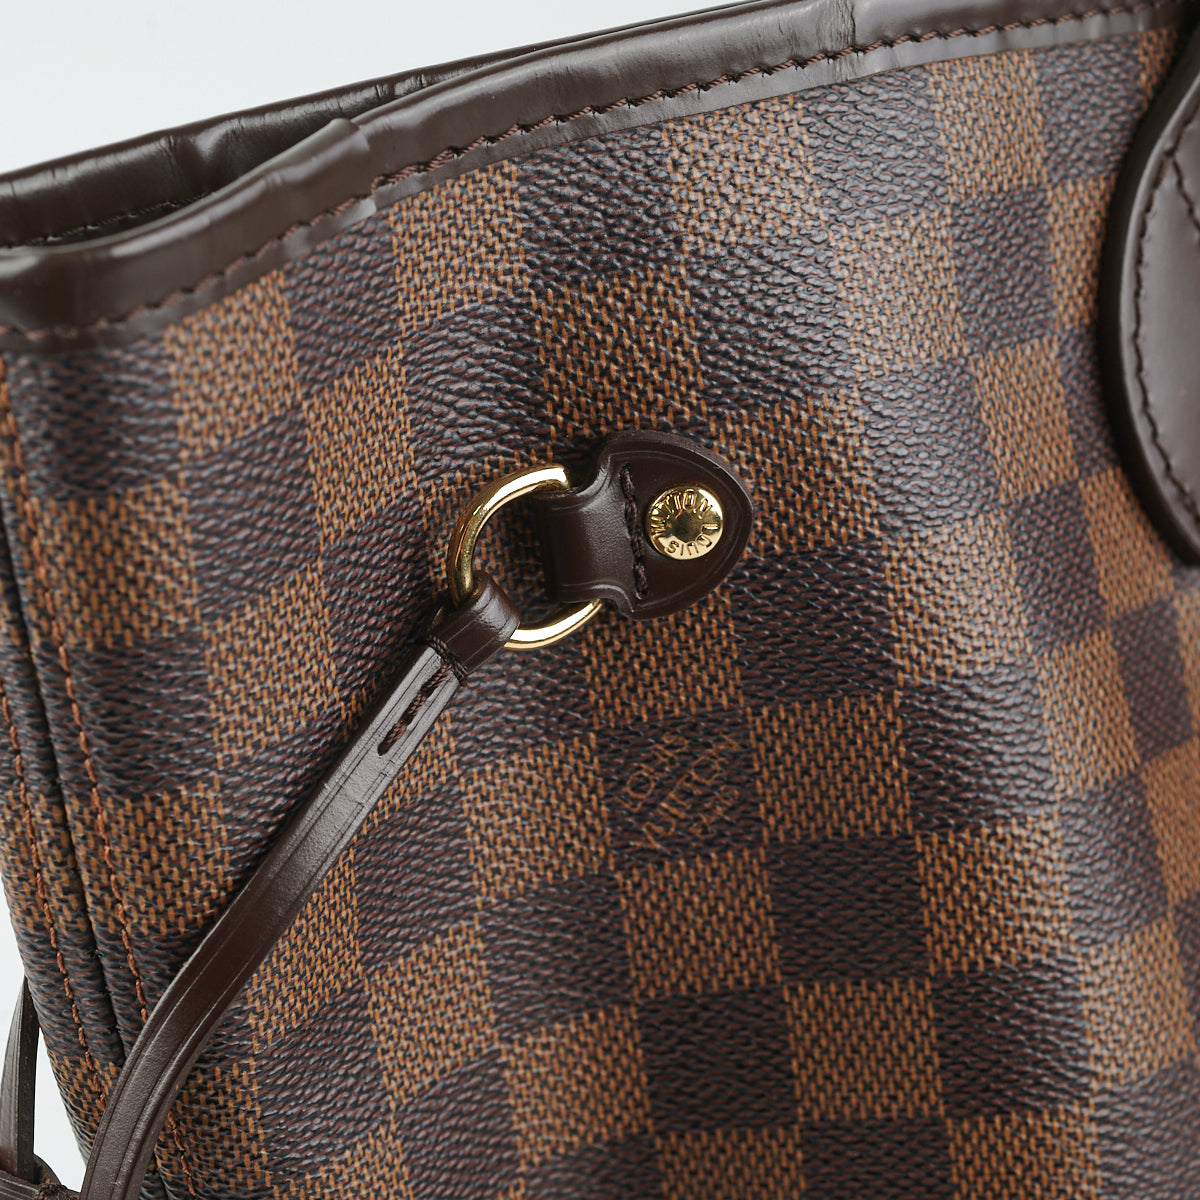 Louis Vuitton Neverfull MM size in damier ebene – Lady Clara's Collection